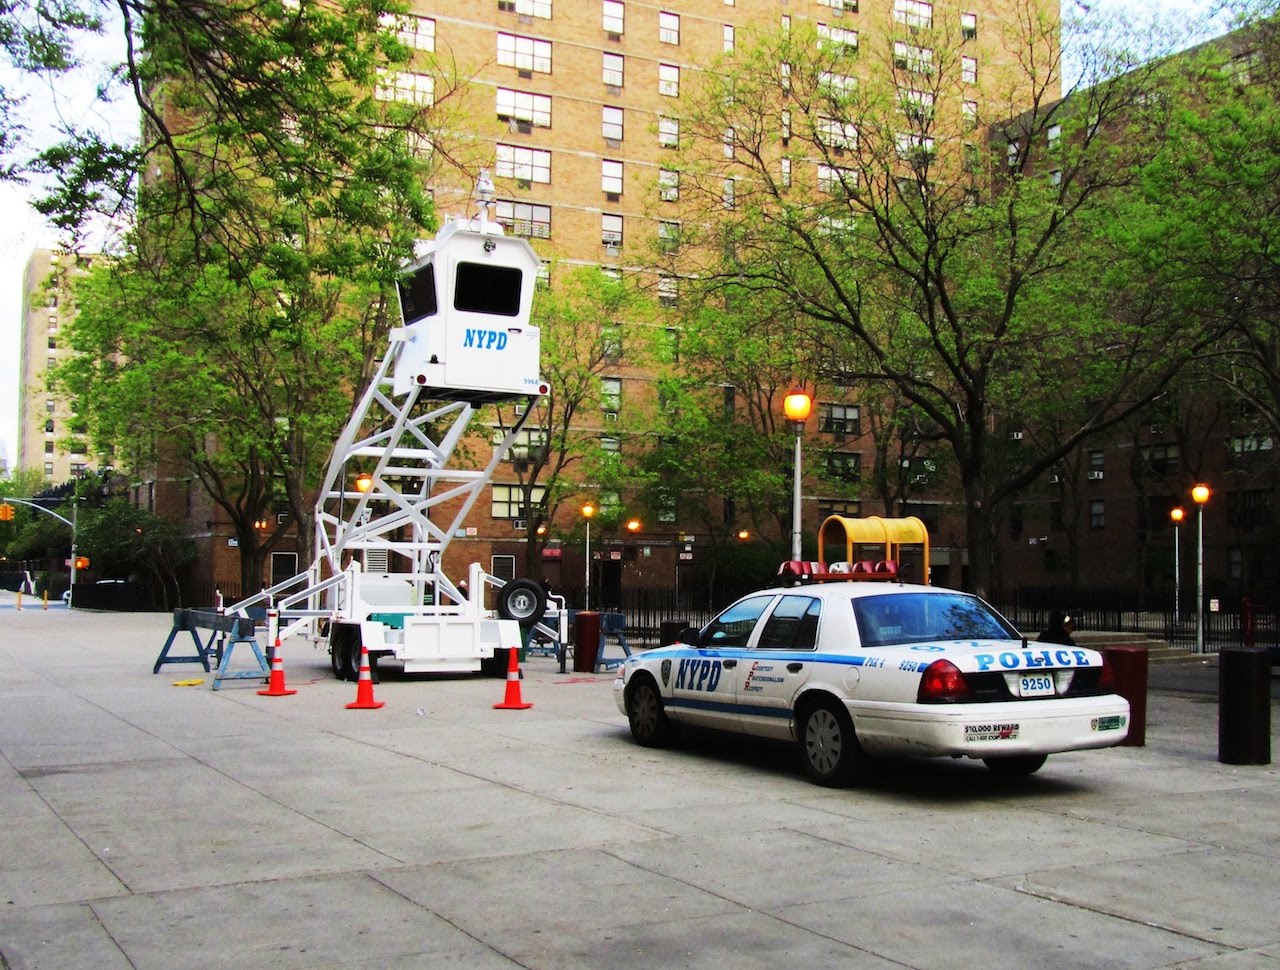 NYPD Tower